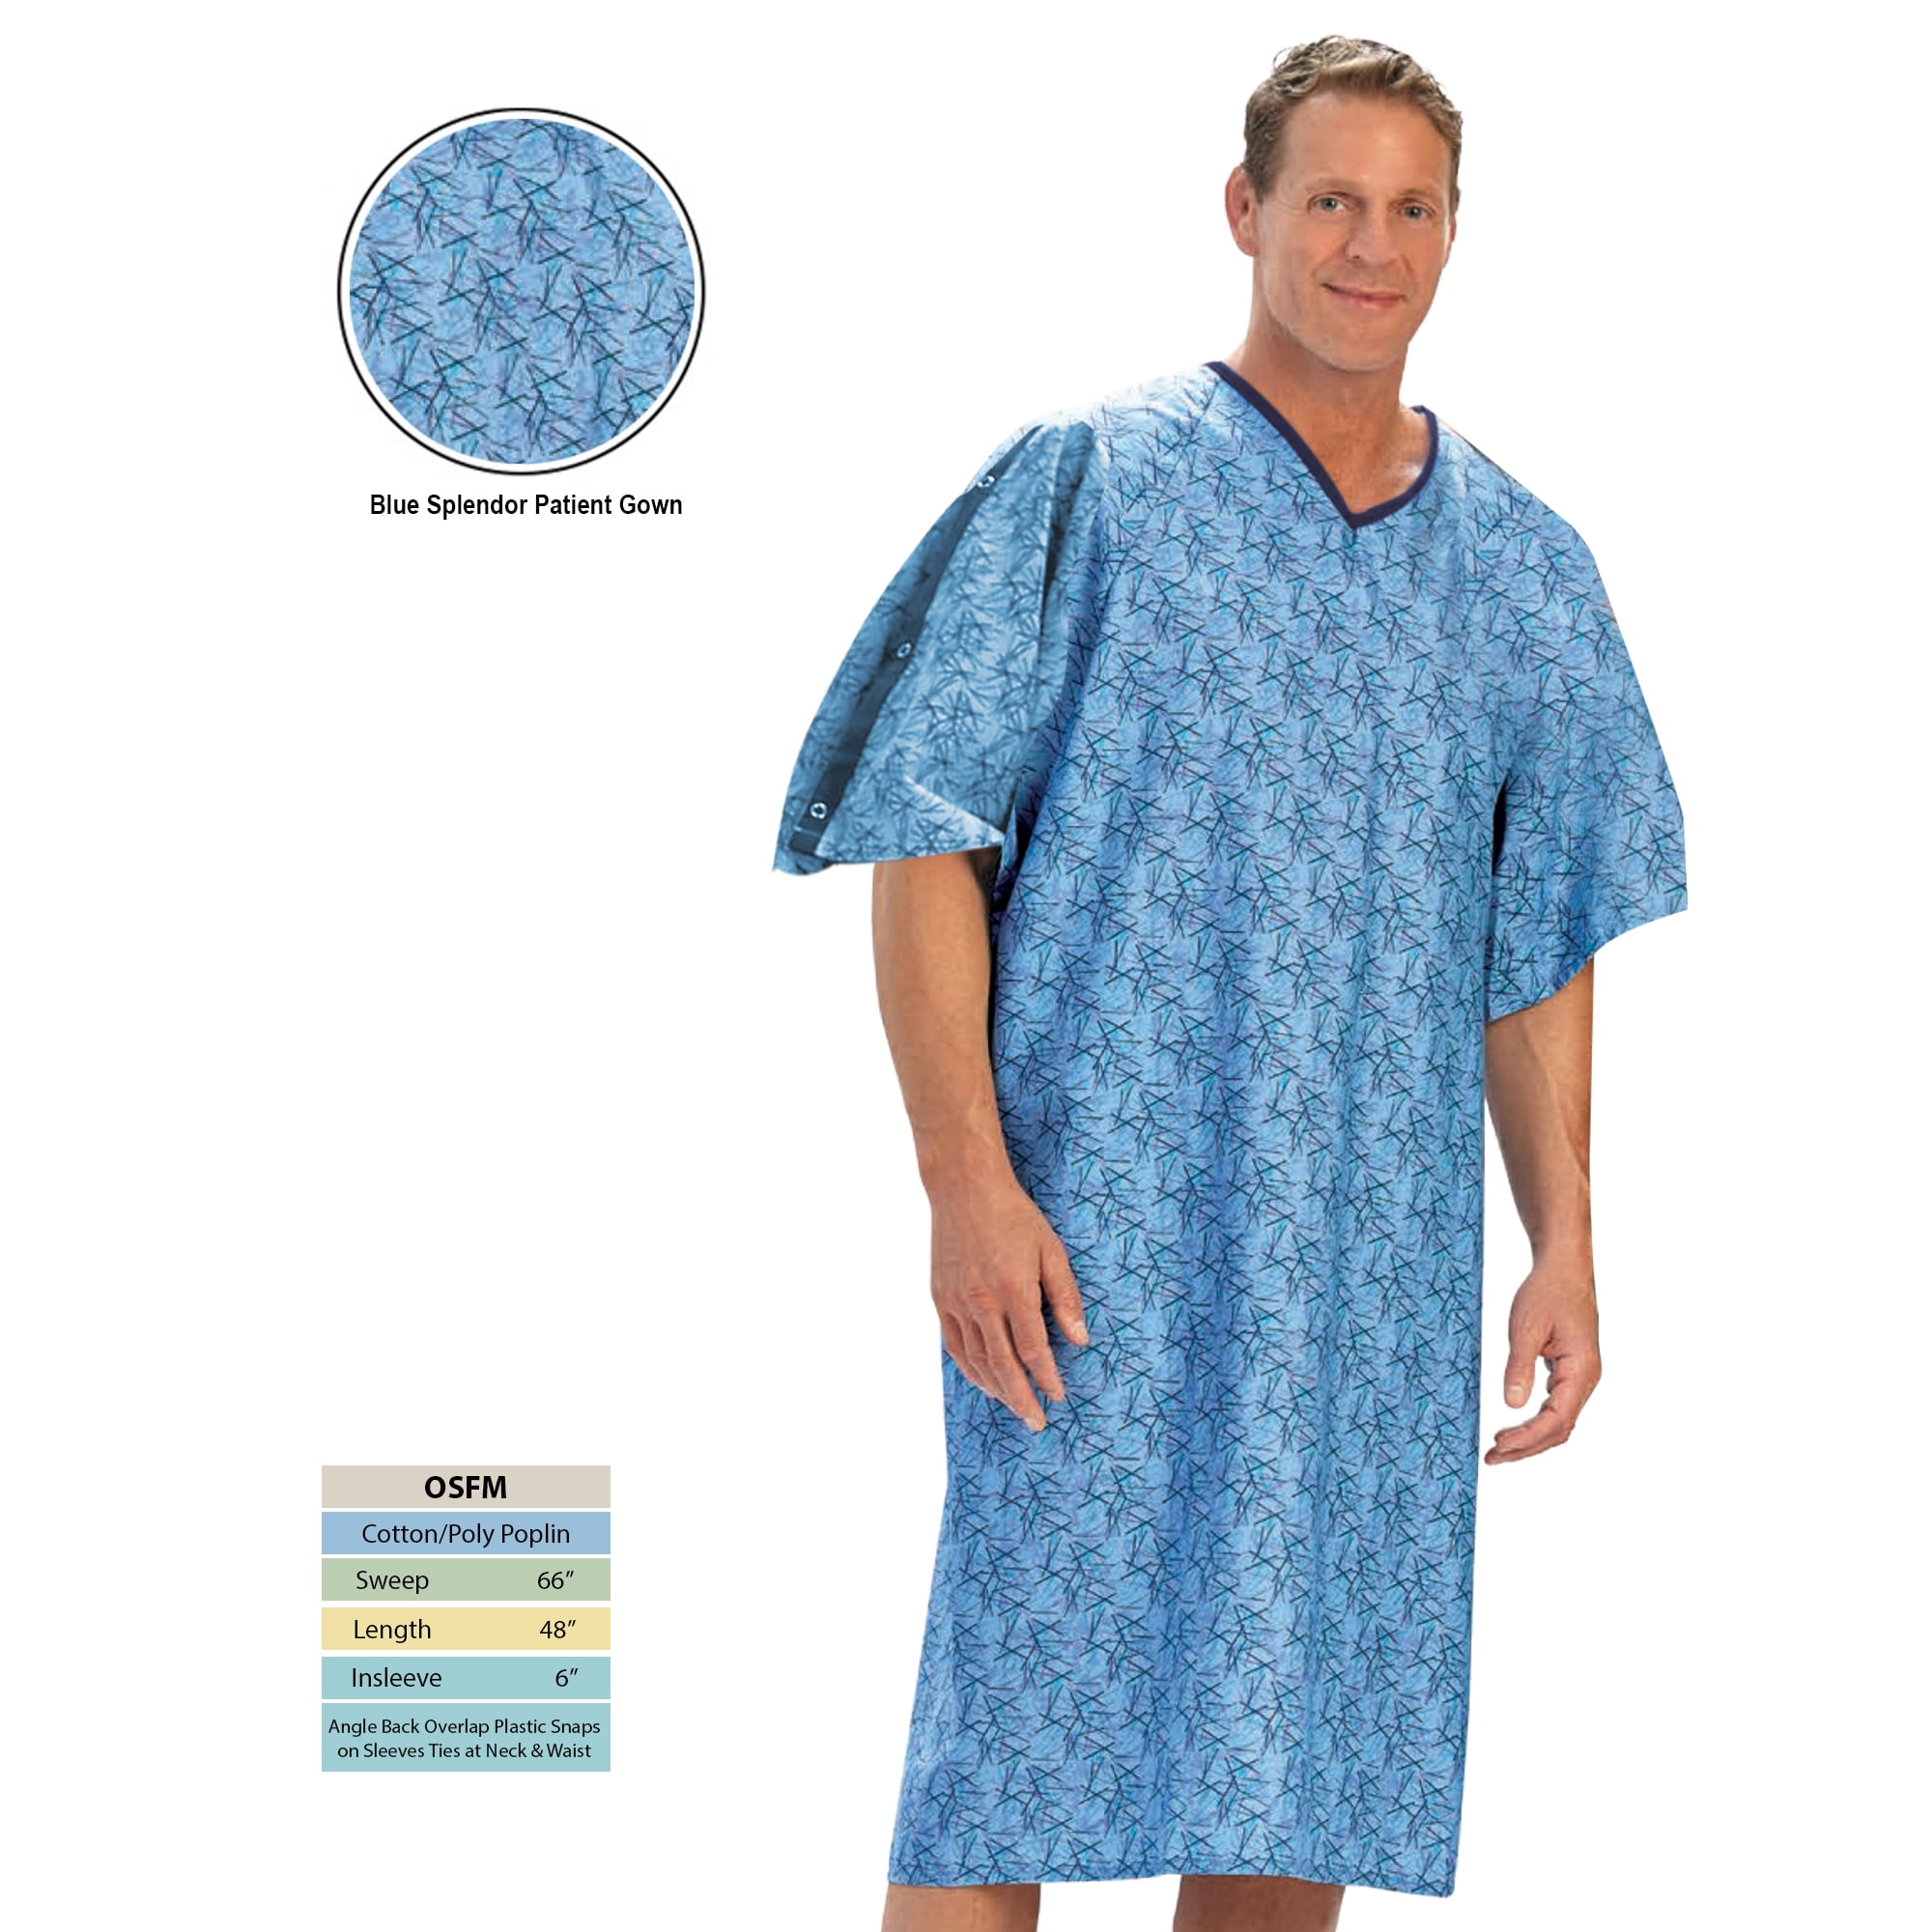 Personal Touch Angle Back Overlap Premium Patient IV Sleeves Hospital Gown  with Telemetry Pocket, Raspberry Grey Diamonds (10) - Walmart.com | Hospital  gown, Patient gown, Adaptive clothing